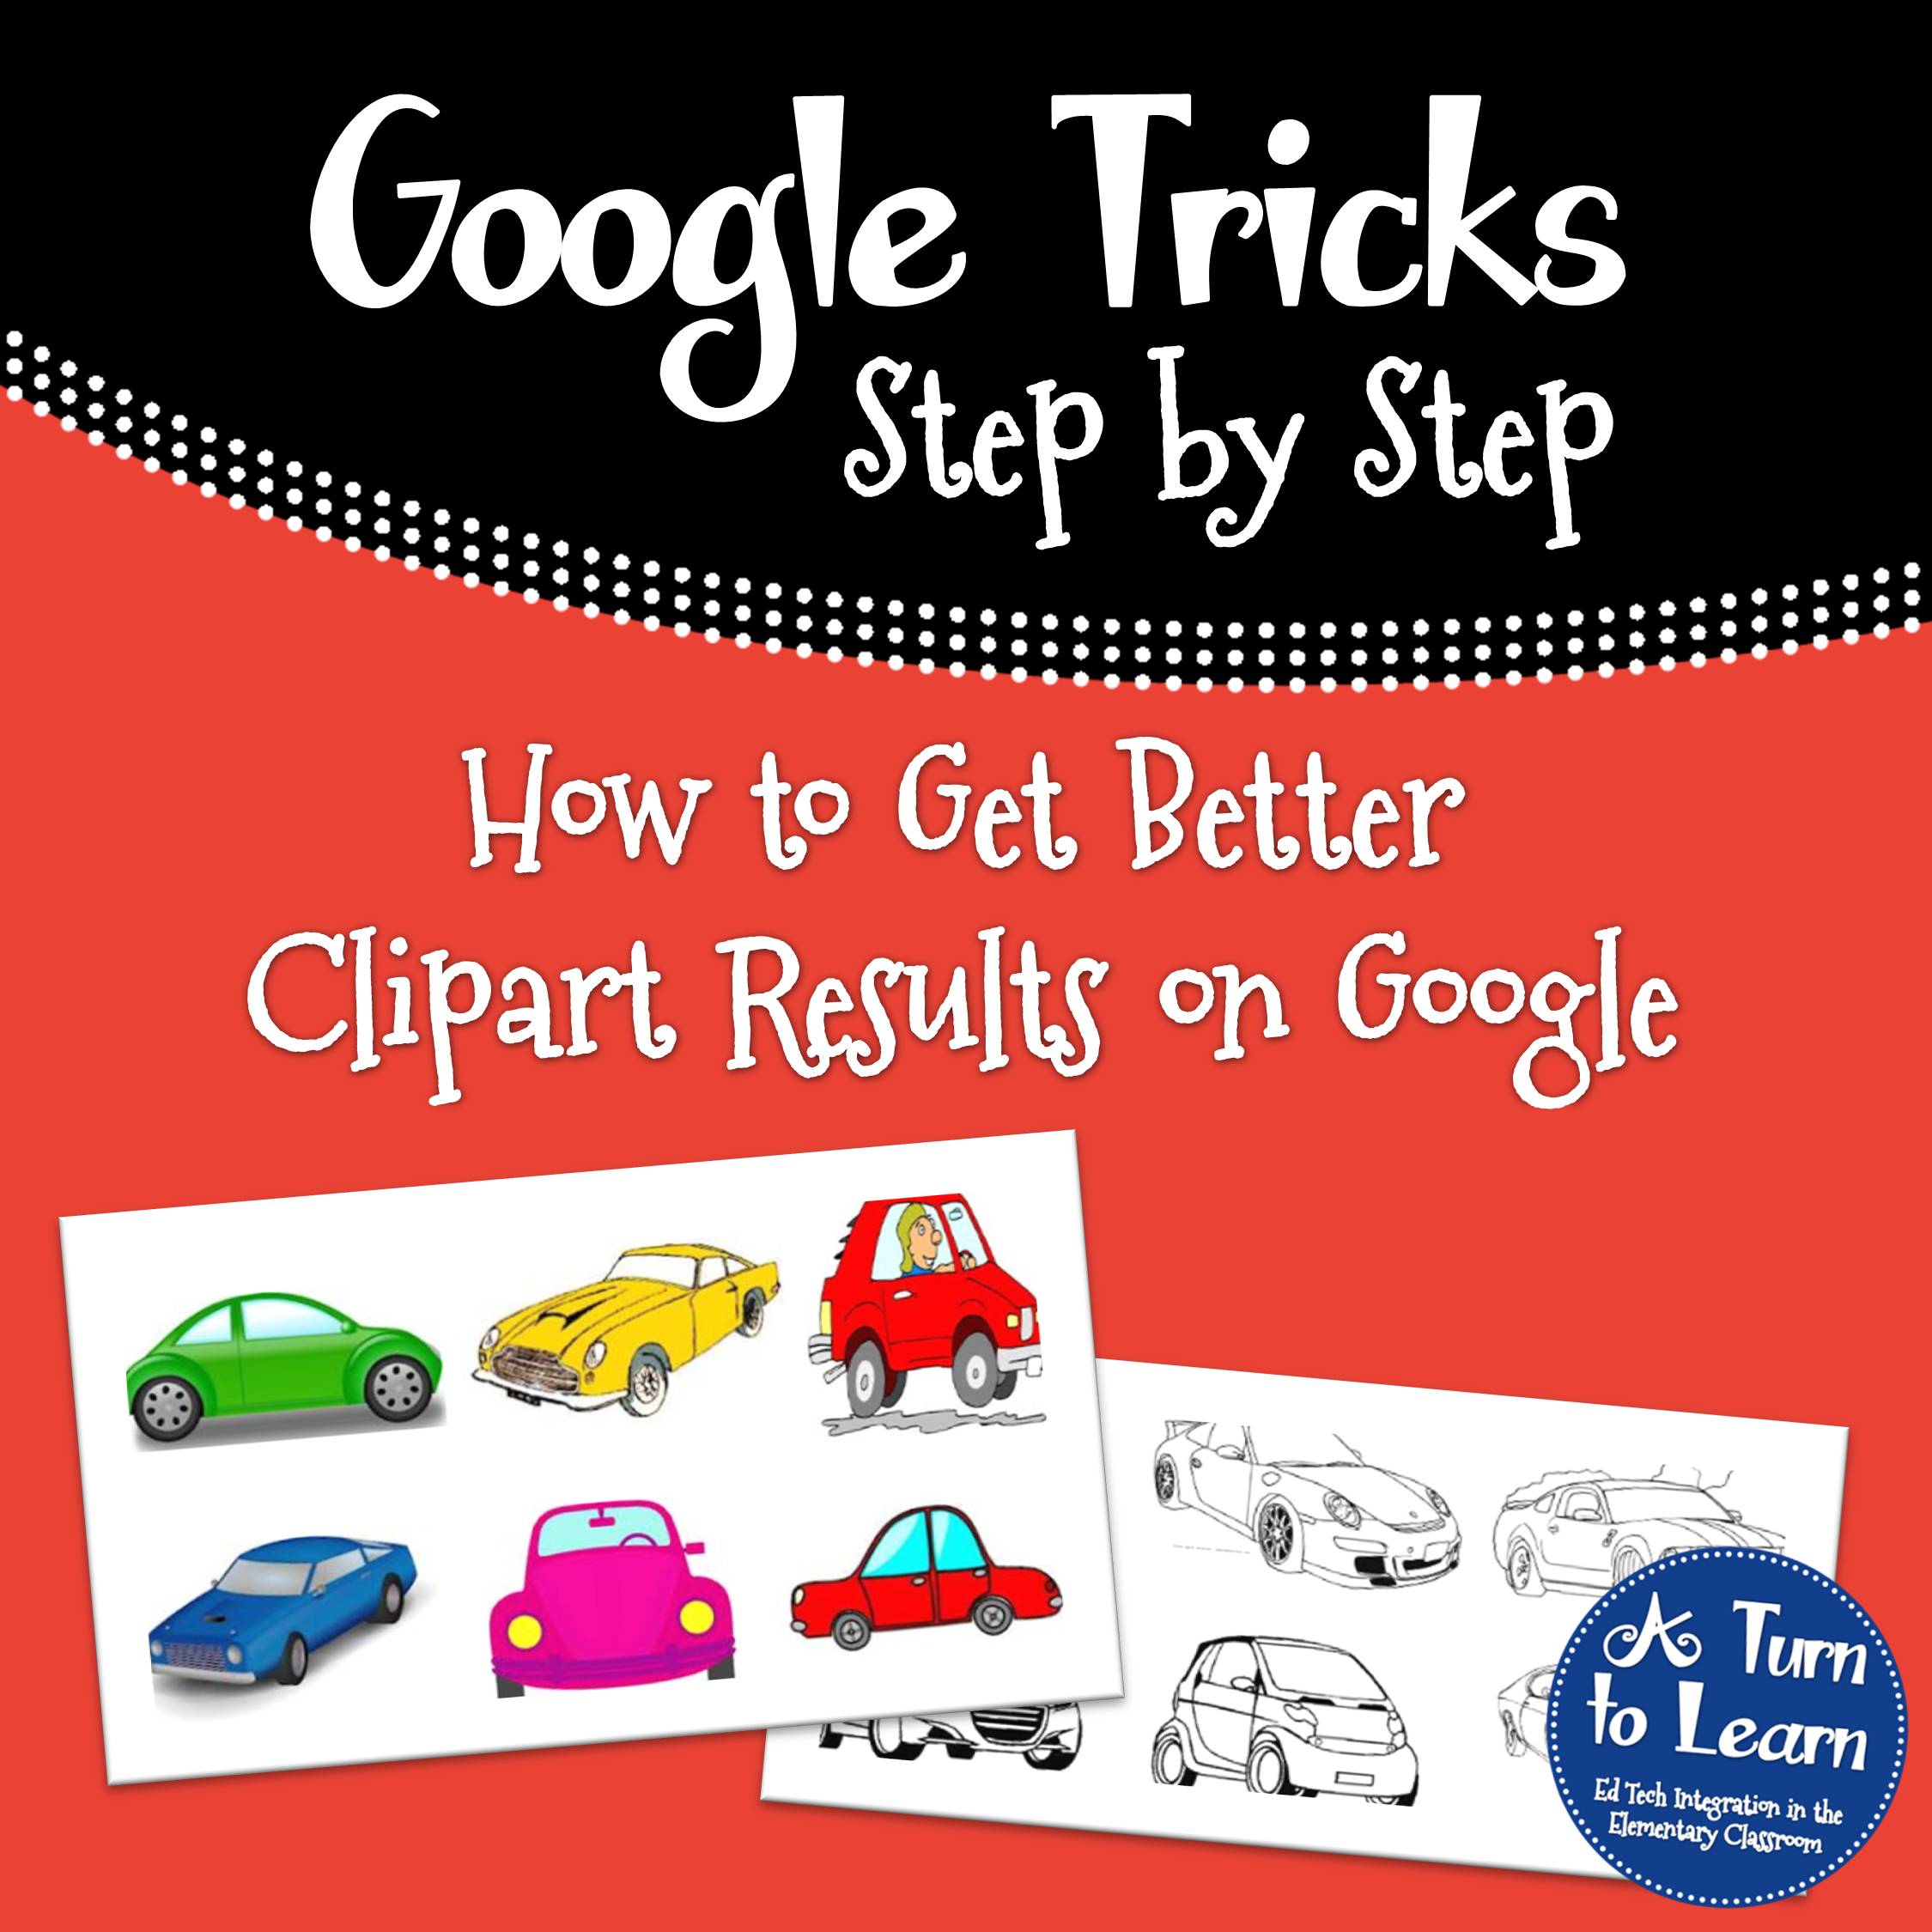 How to Get Better Clipart Results on Google